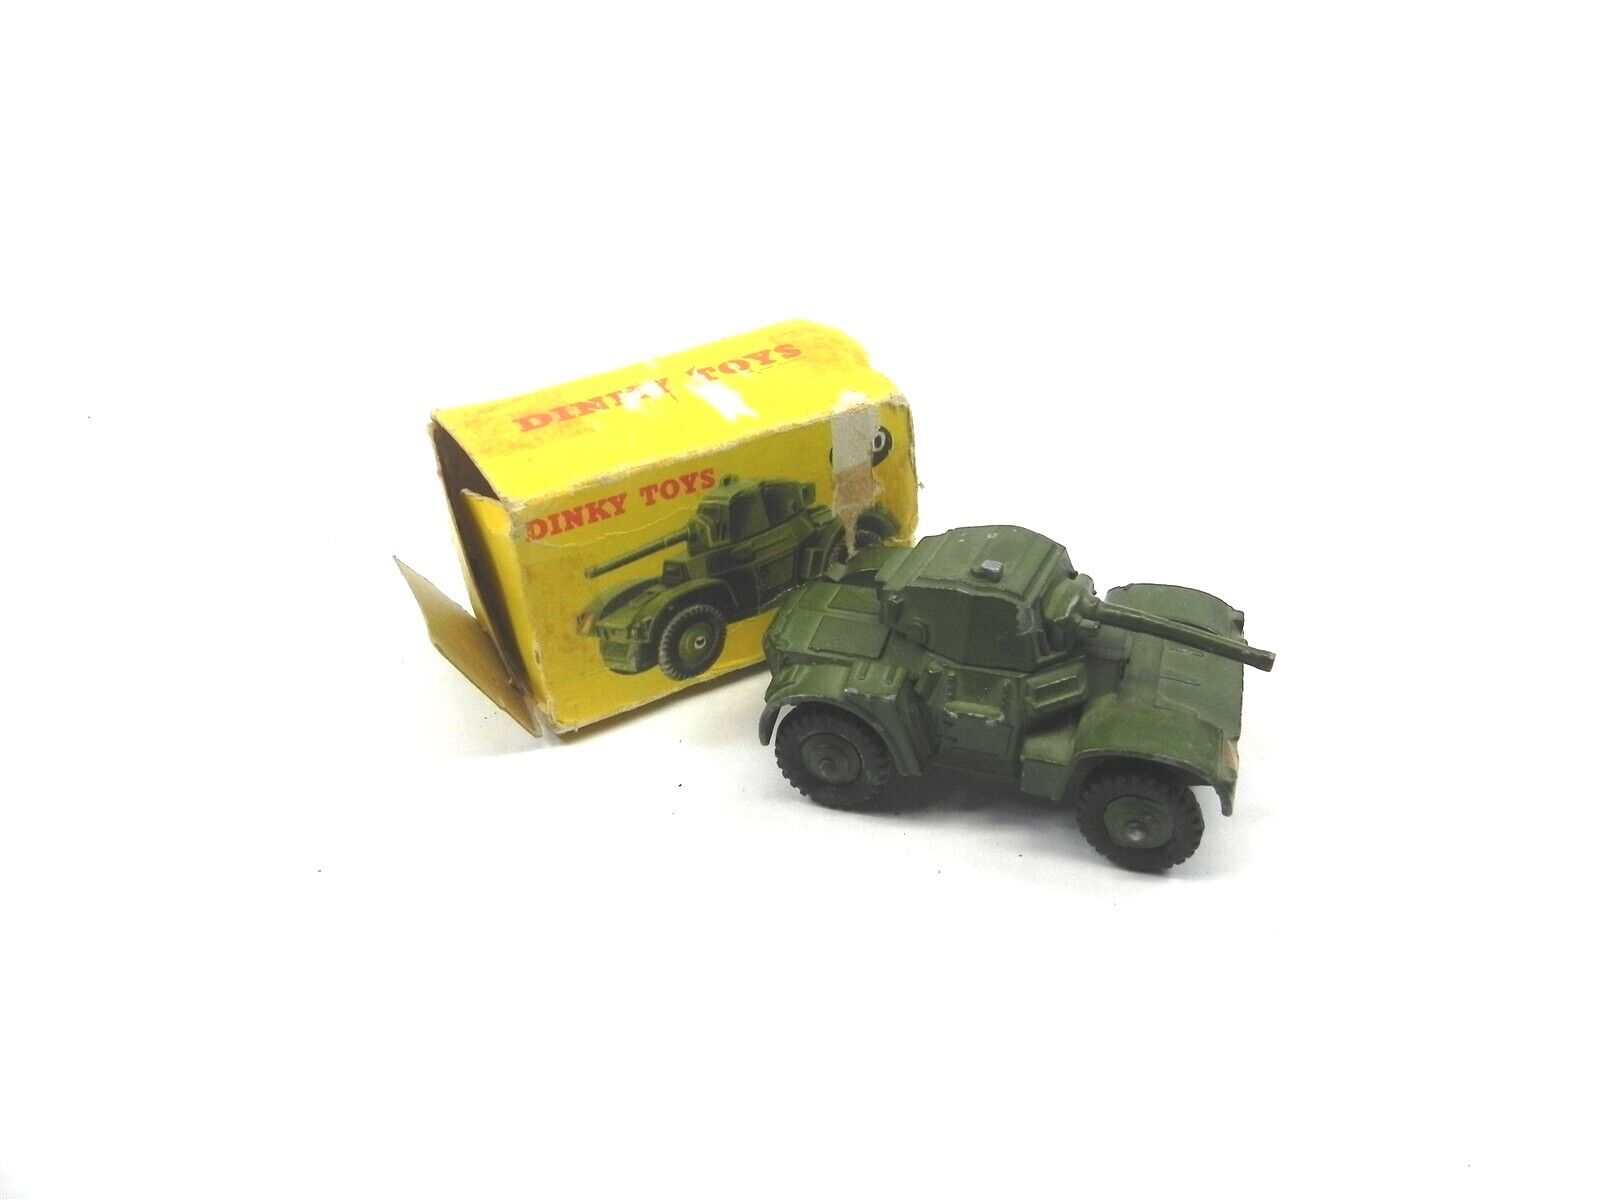 VINTAGE ANTIQUE DINKY TOYS #670 ARMOURED CAR MILITARY DAINLER TANK FOR DISPLAY